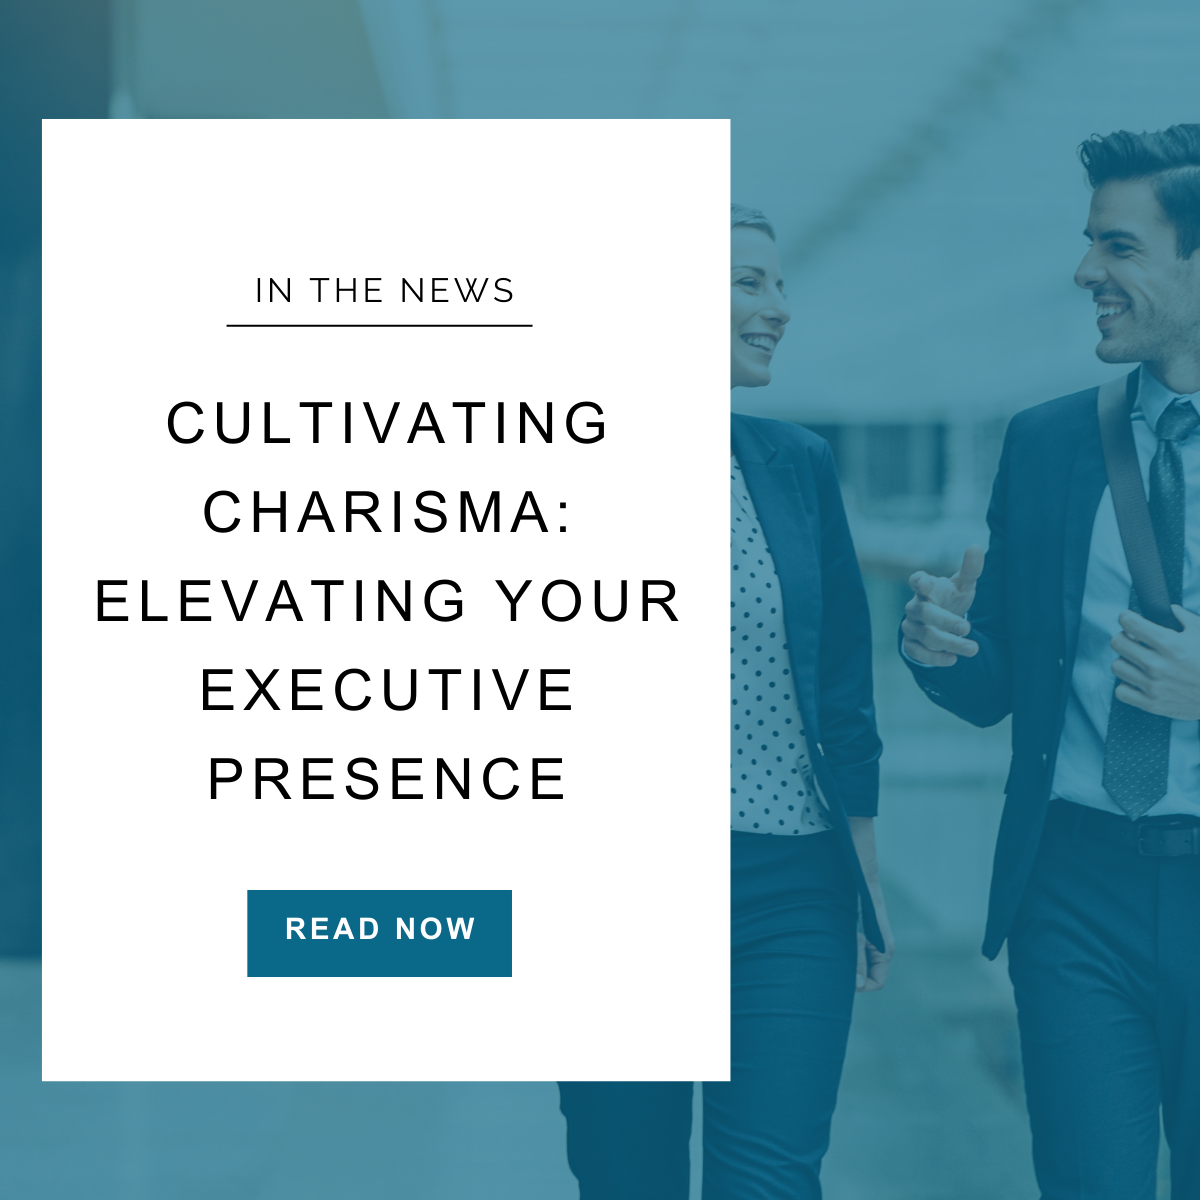 Cultivating Charisma: Elevating Your Executive Presence